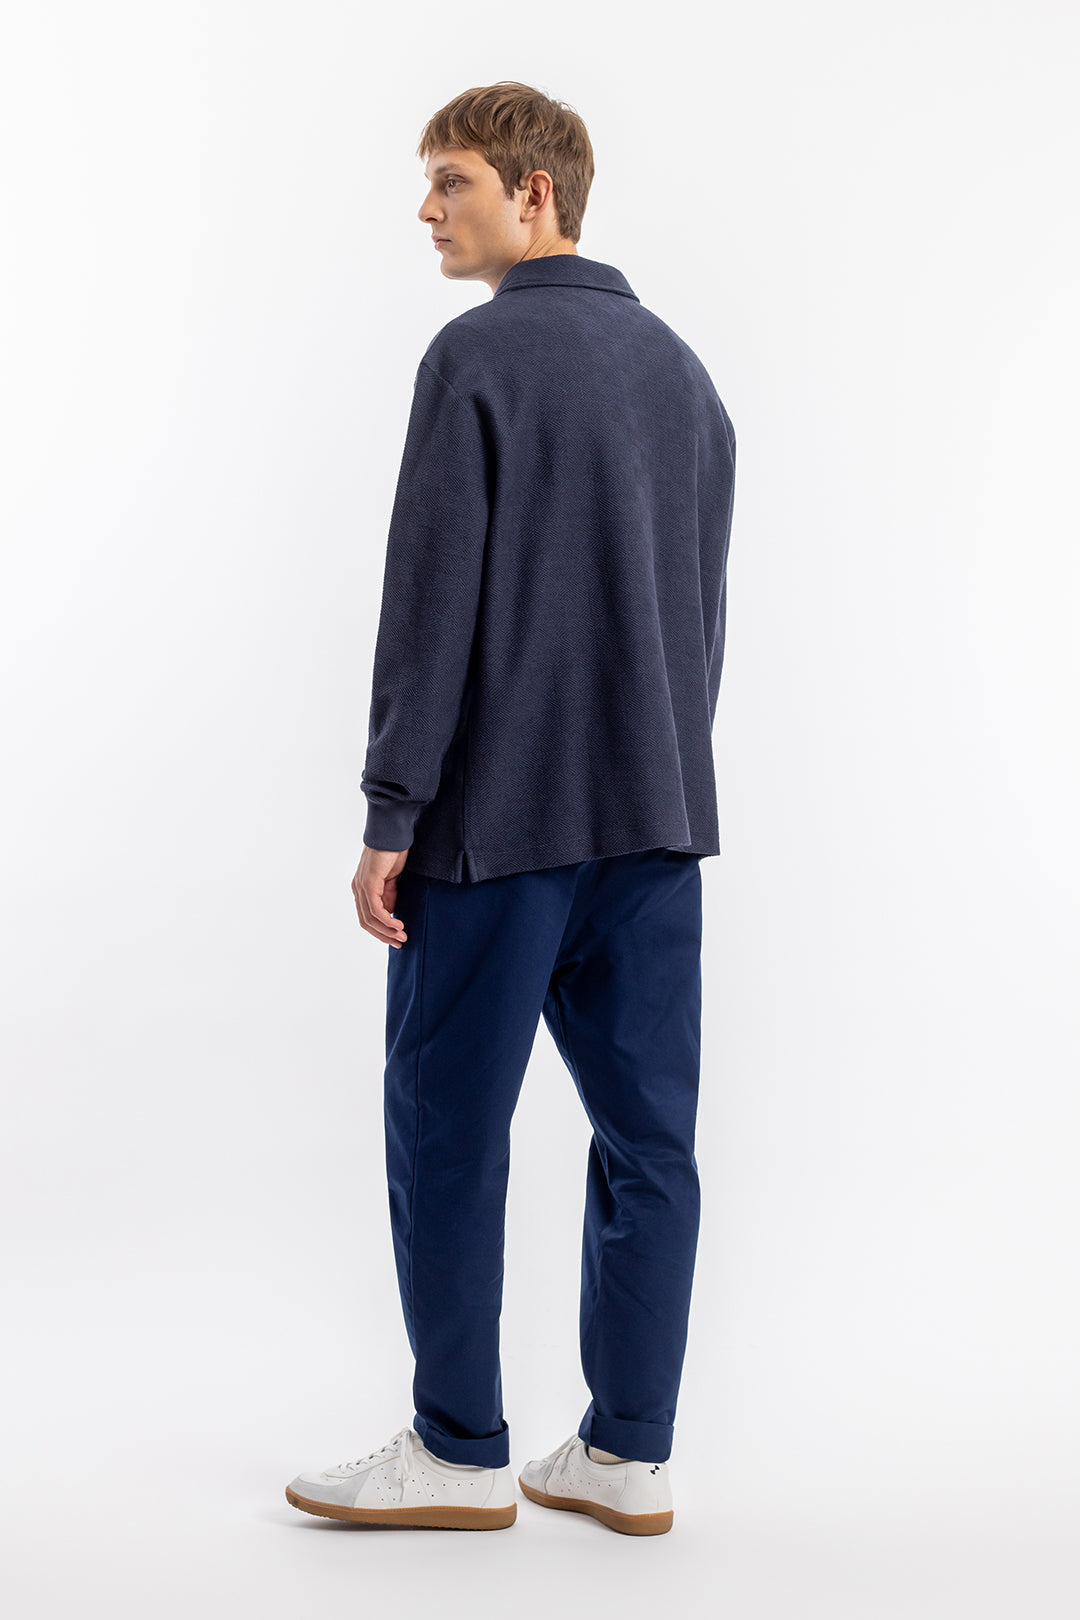 Dark blue, long-sleeved polo shirt made of organic cotton from Rotholz